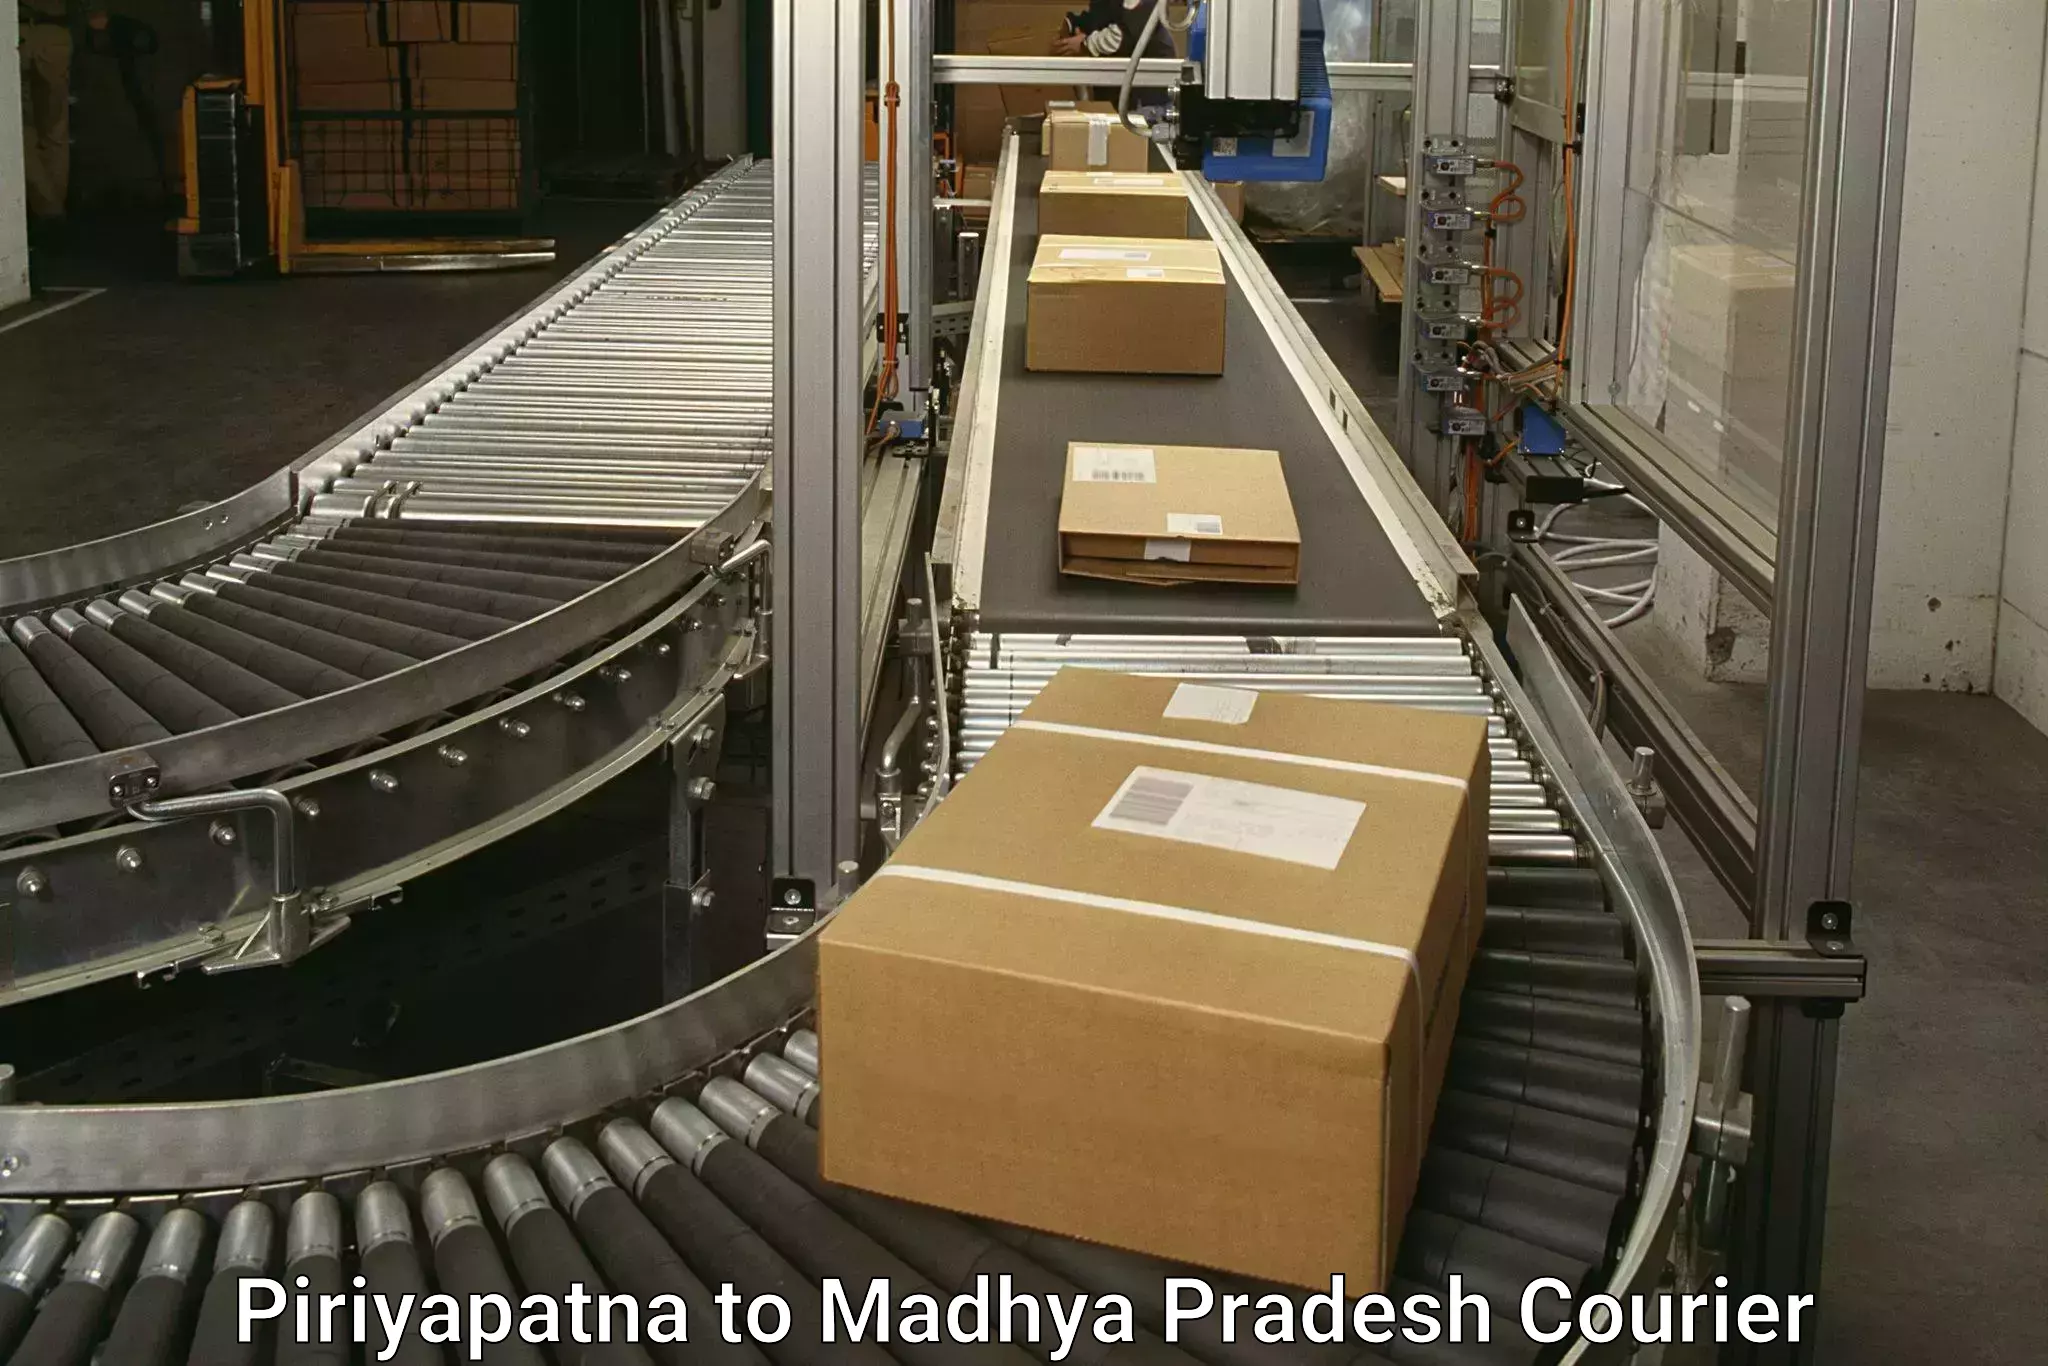 State-of-the-art courier technology Piriyapatna to Rahatgarh